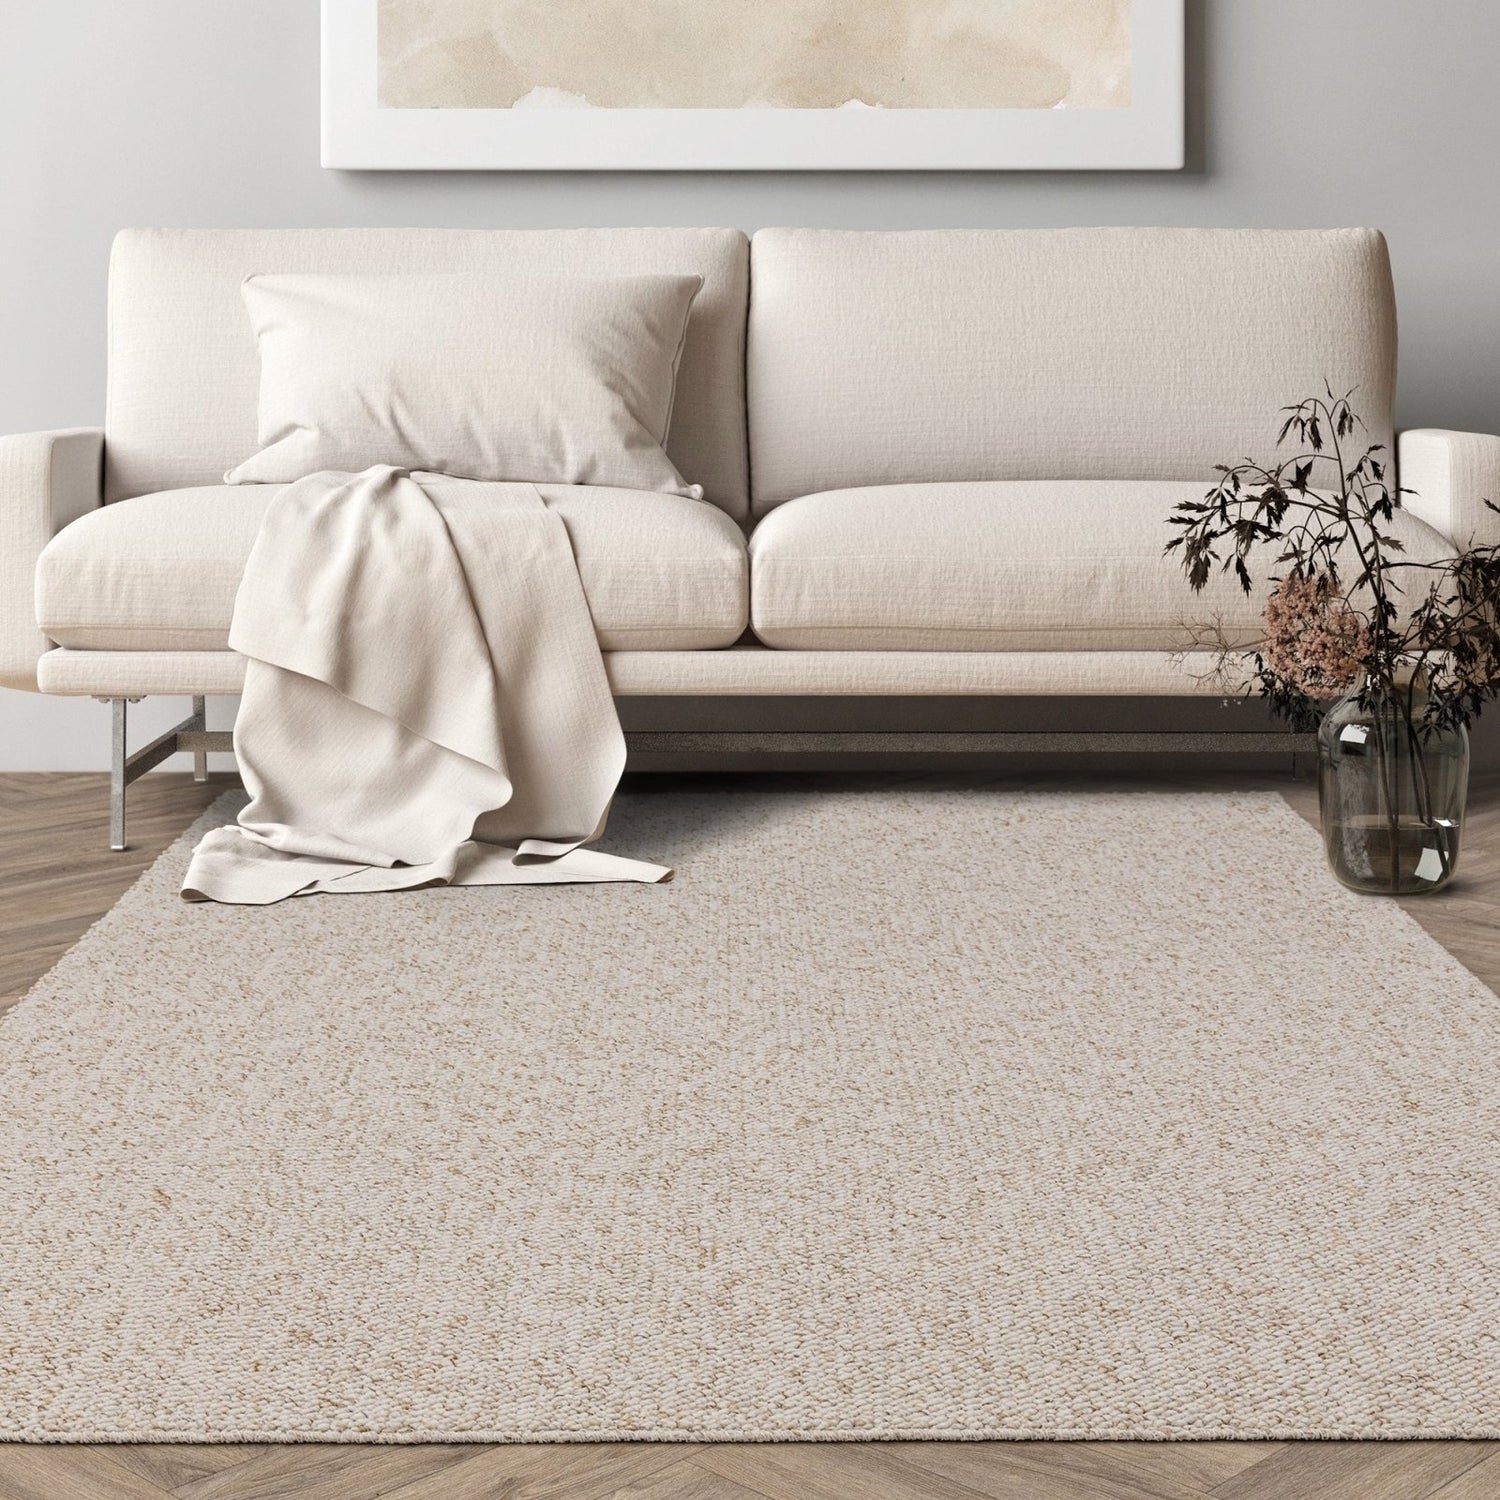 Boden Rugs